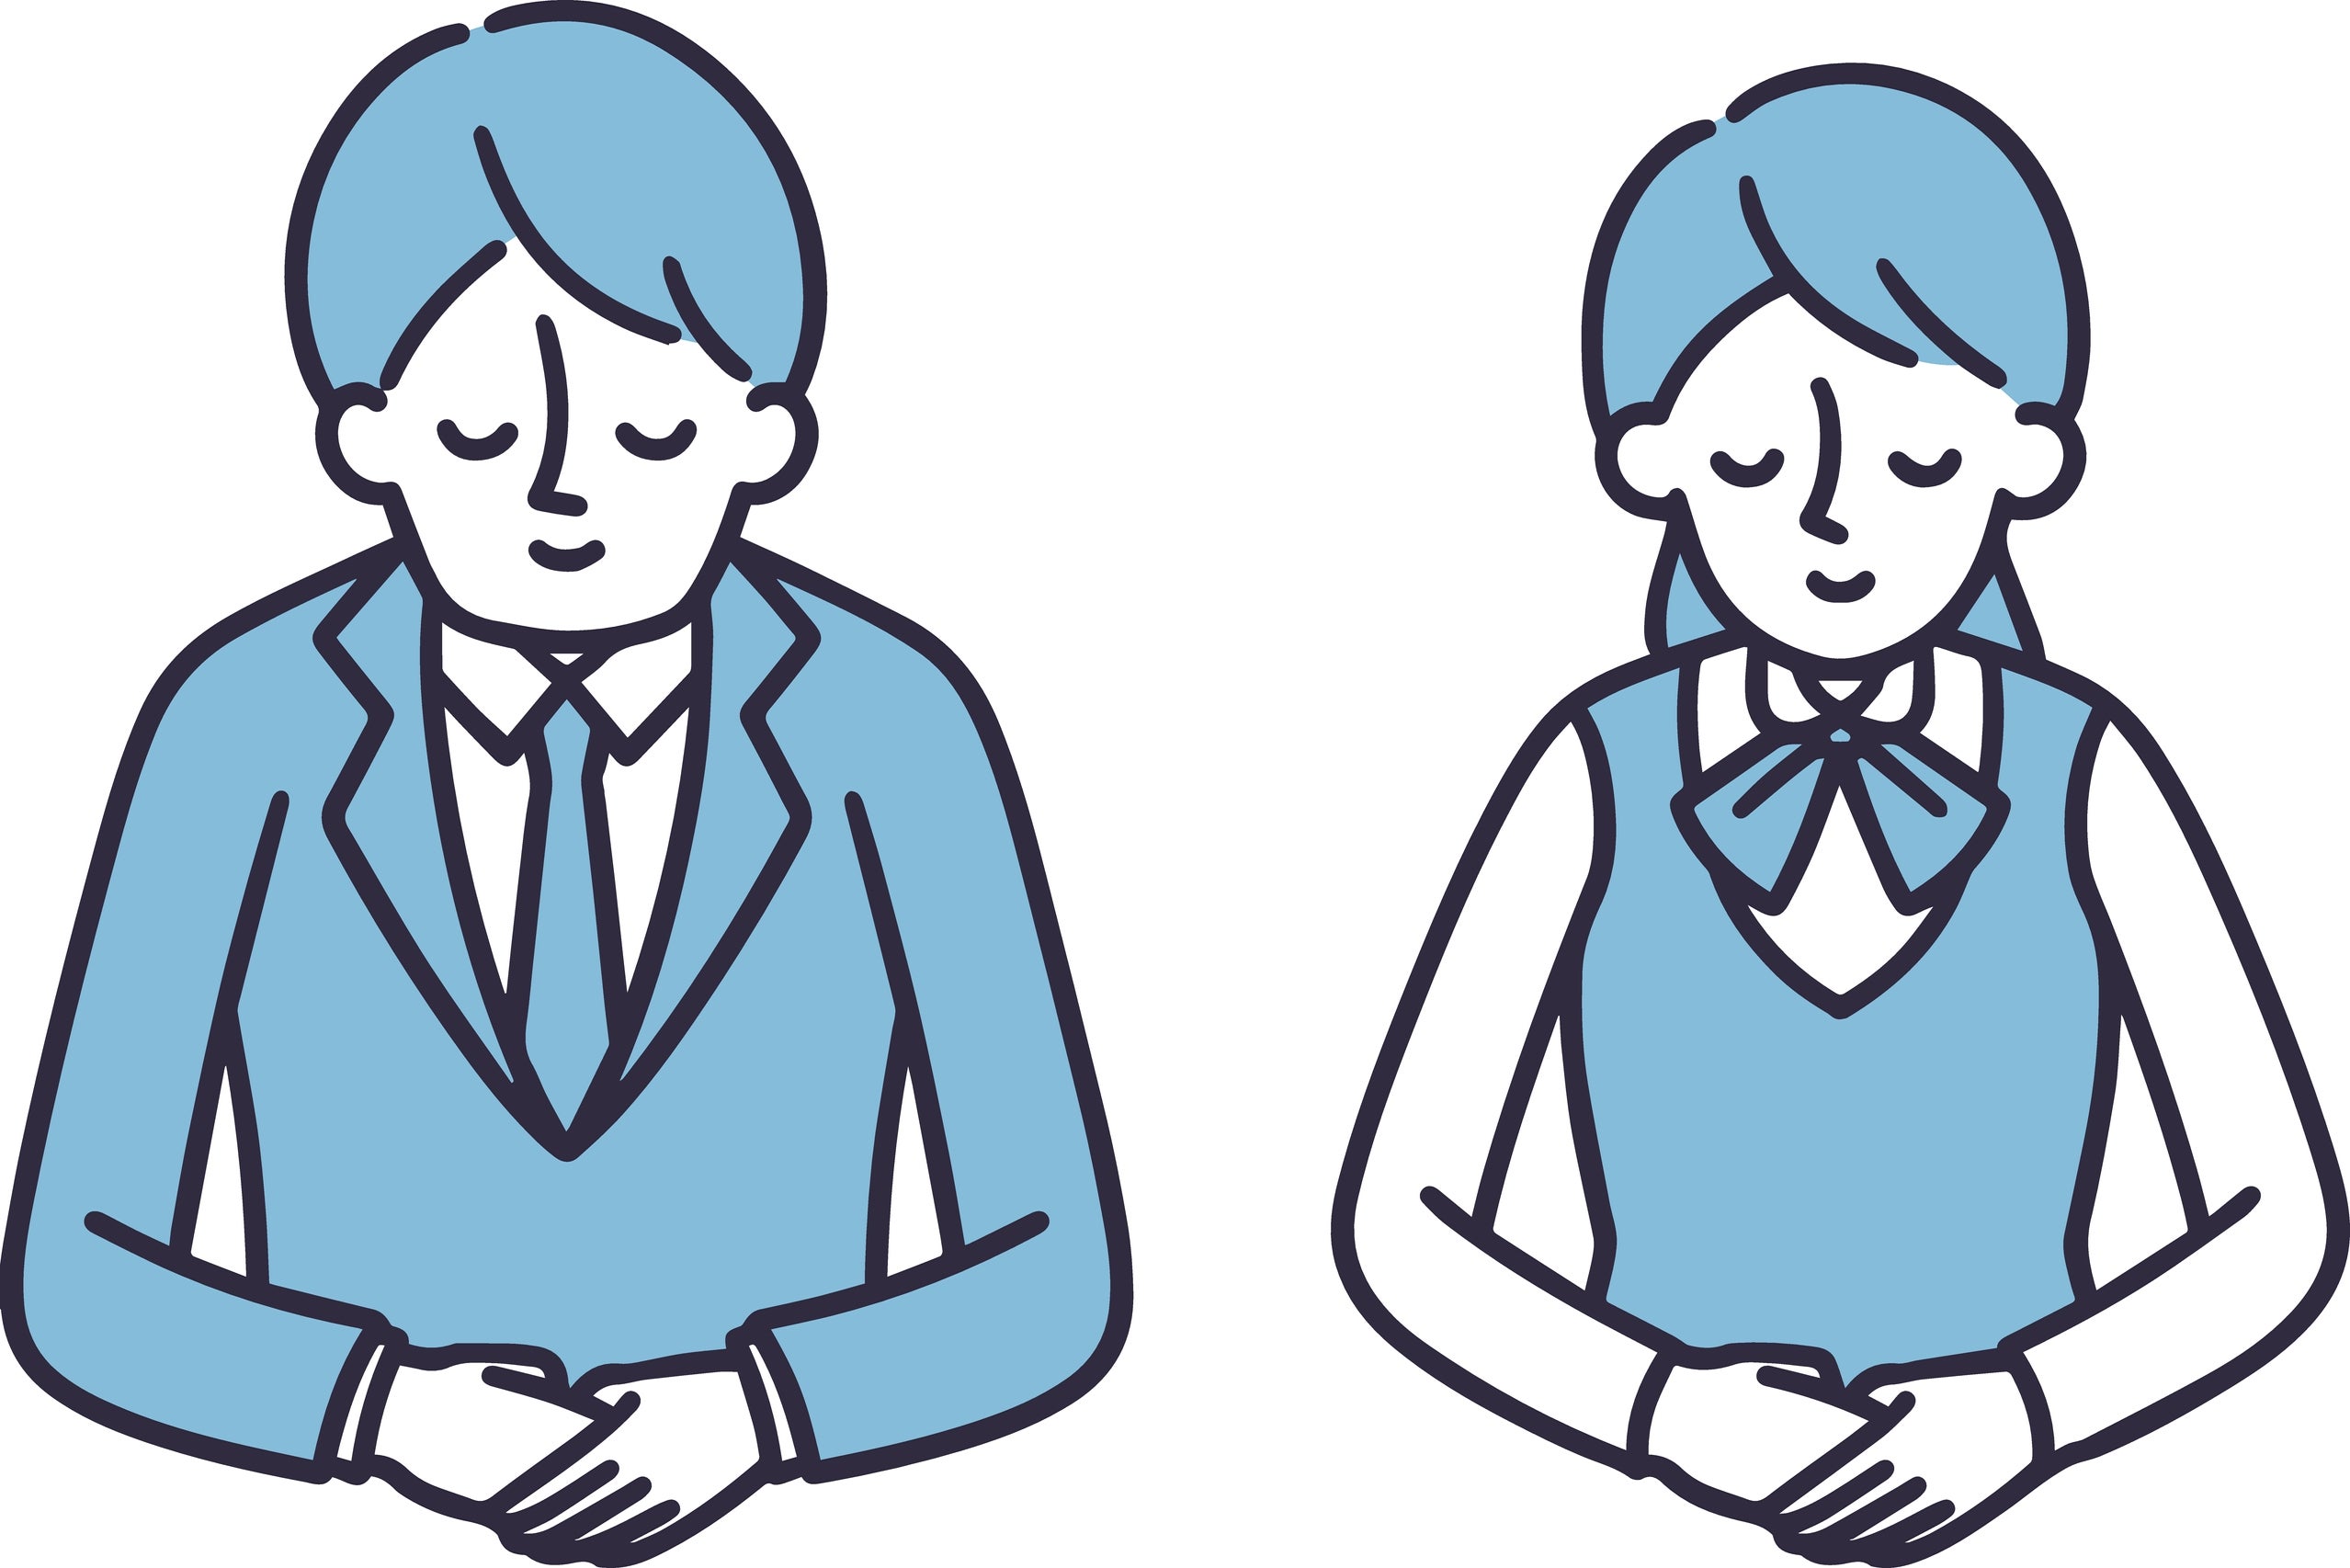 illustration of male and female, looking down, holding their hands, as though apologizing